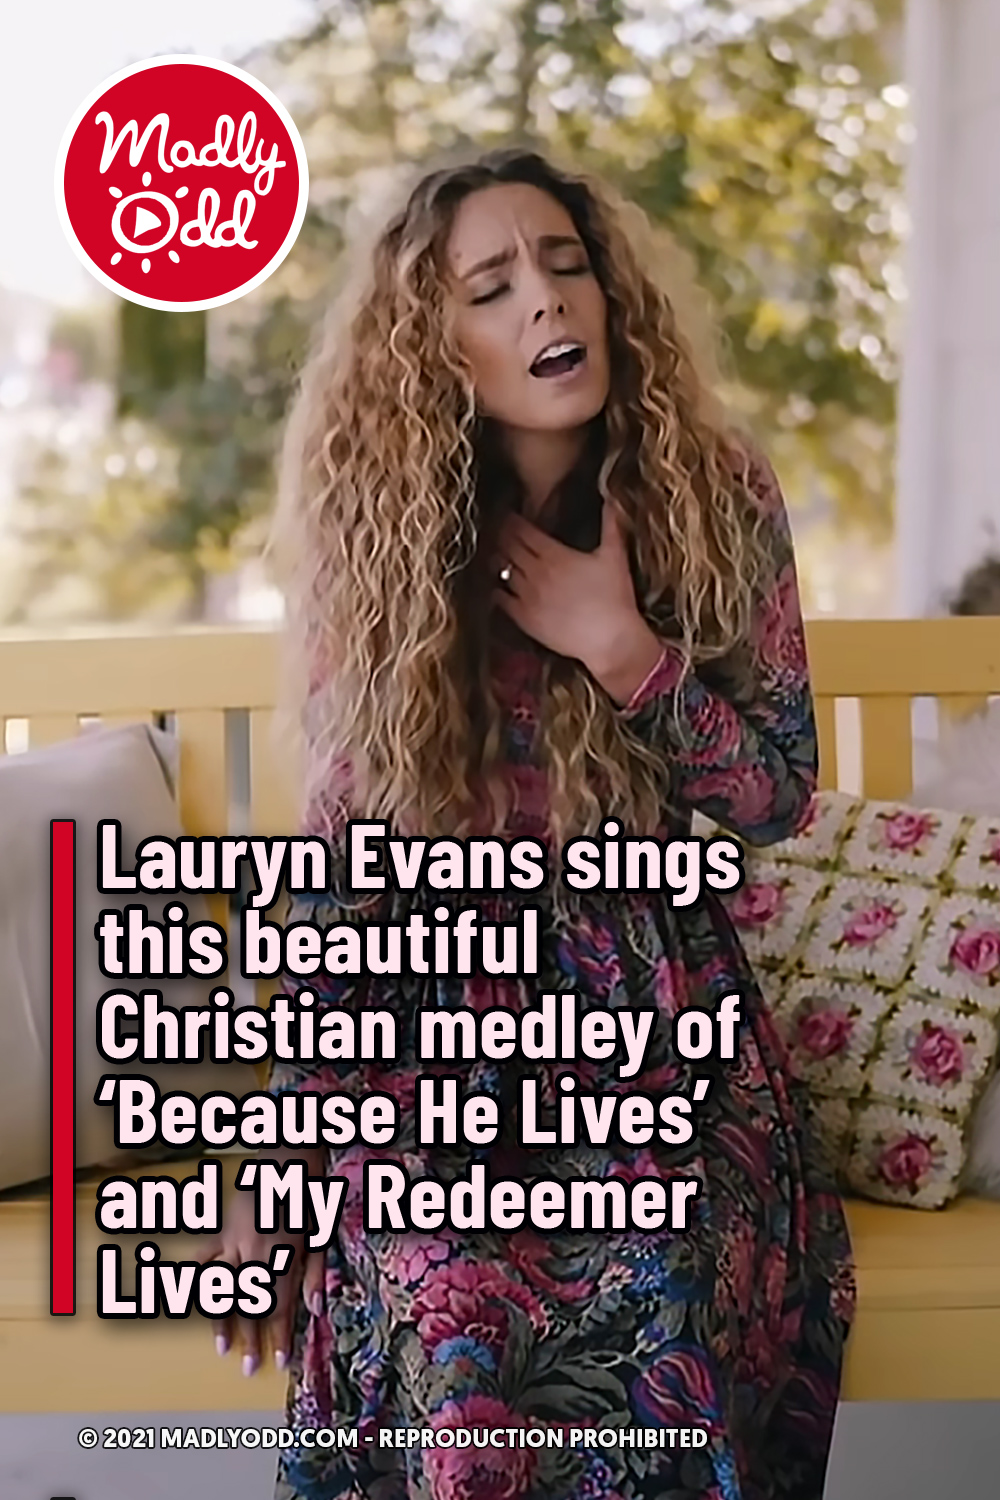 Lauryn Evans sings this beautiful Christian medley of ‘Because He Lives’ and ‘My Redeemer Lives’